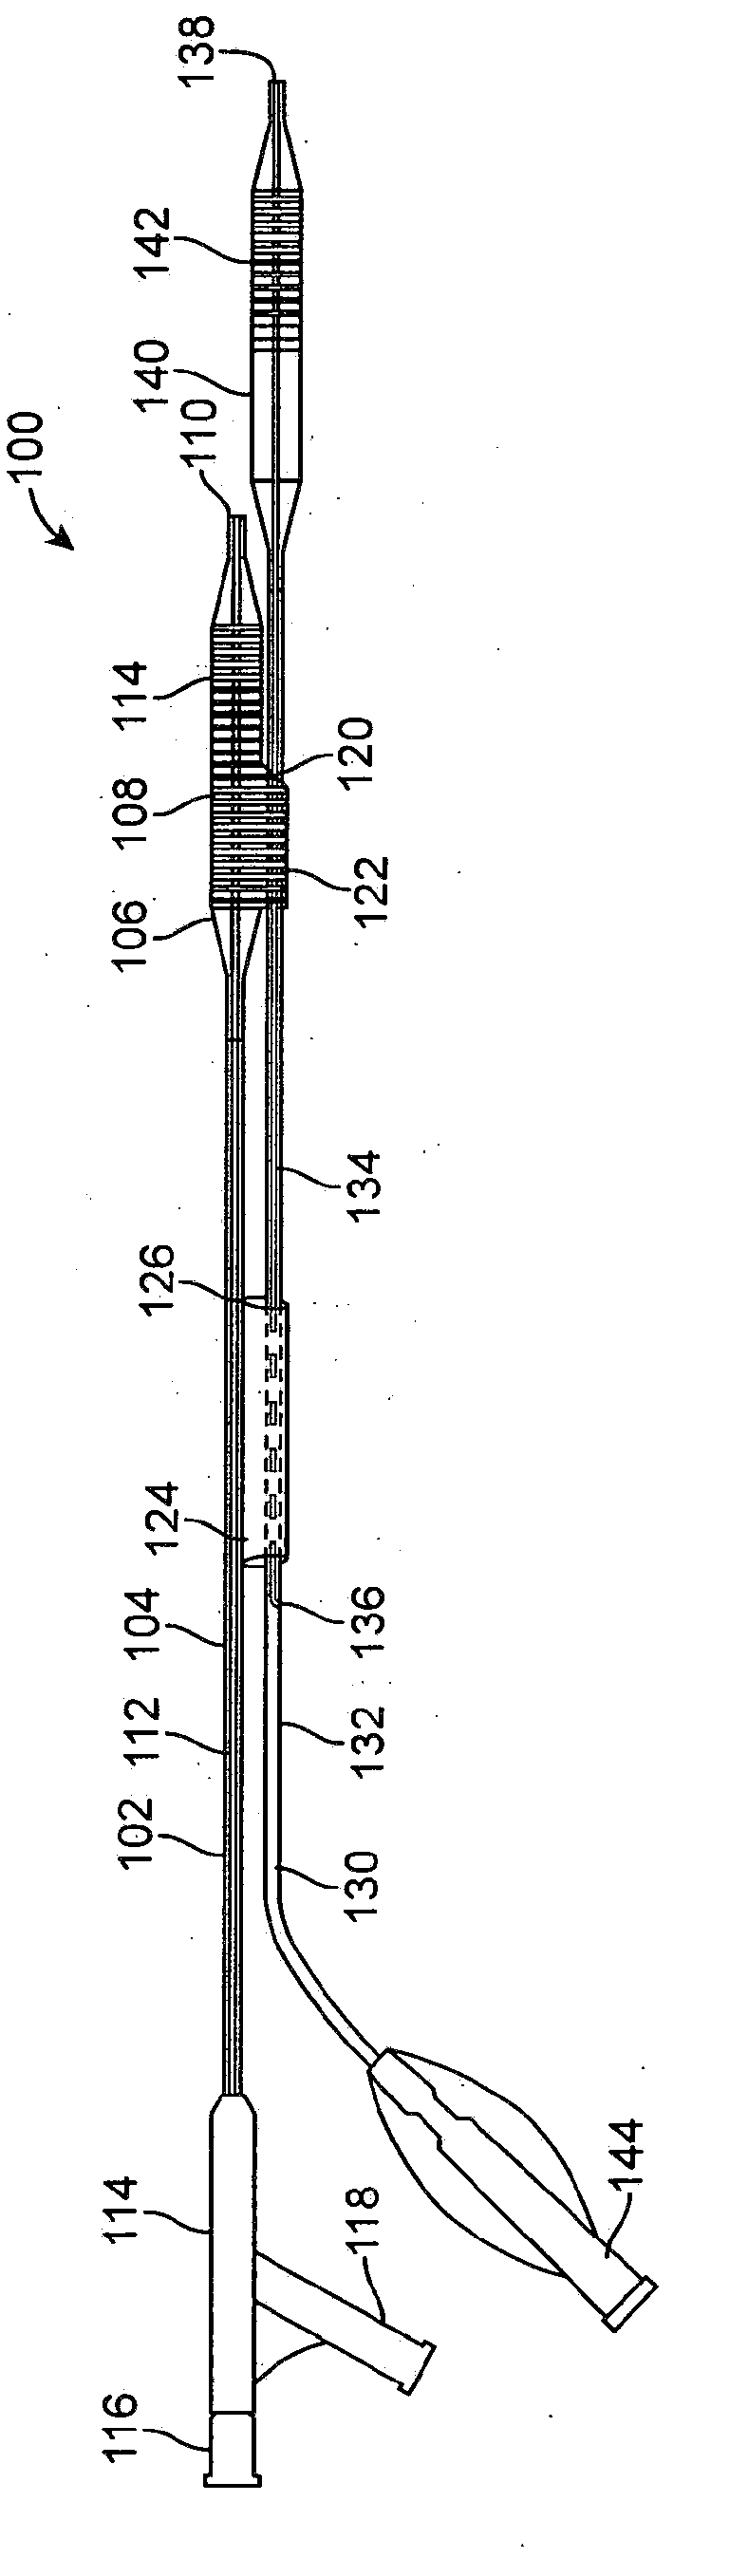 Methods and systems for ostial stenting of a bifurcation